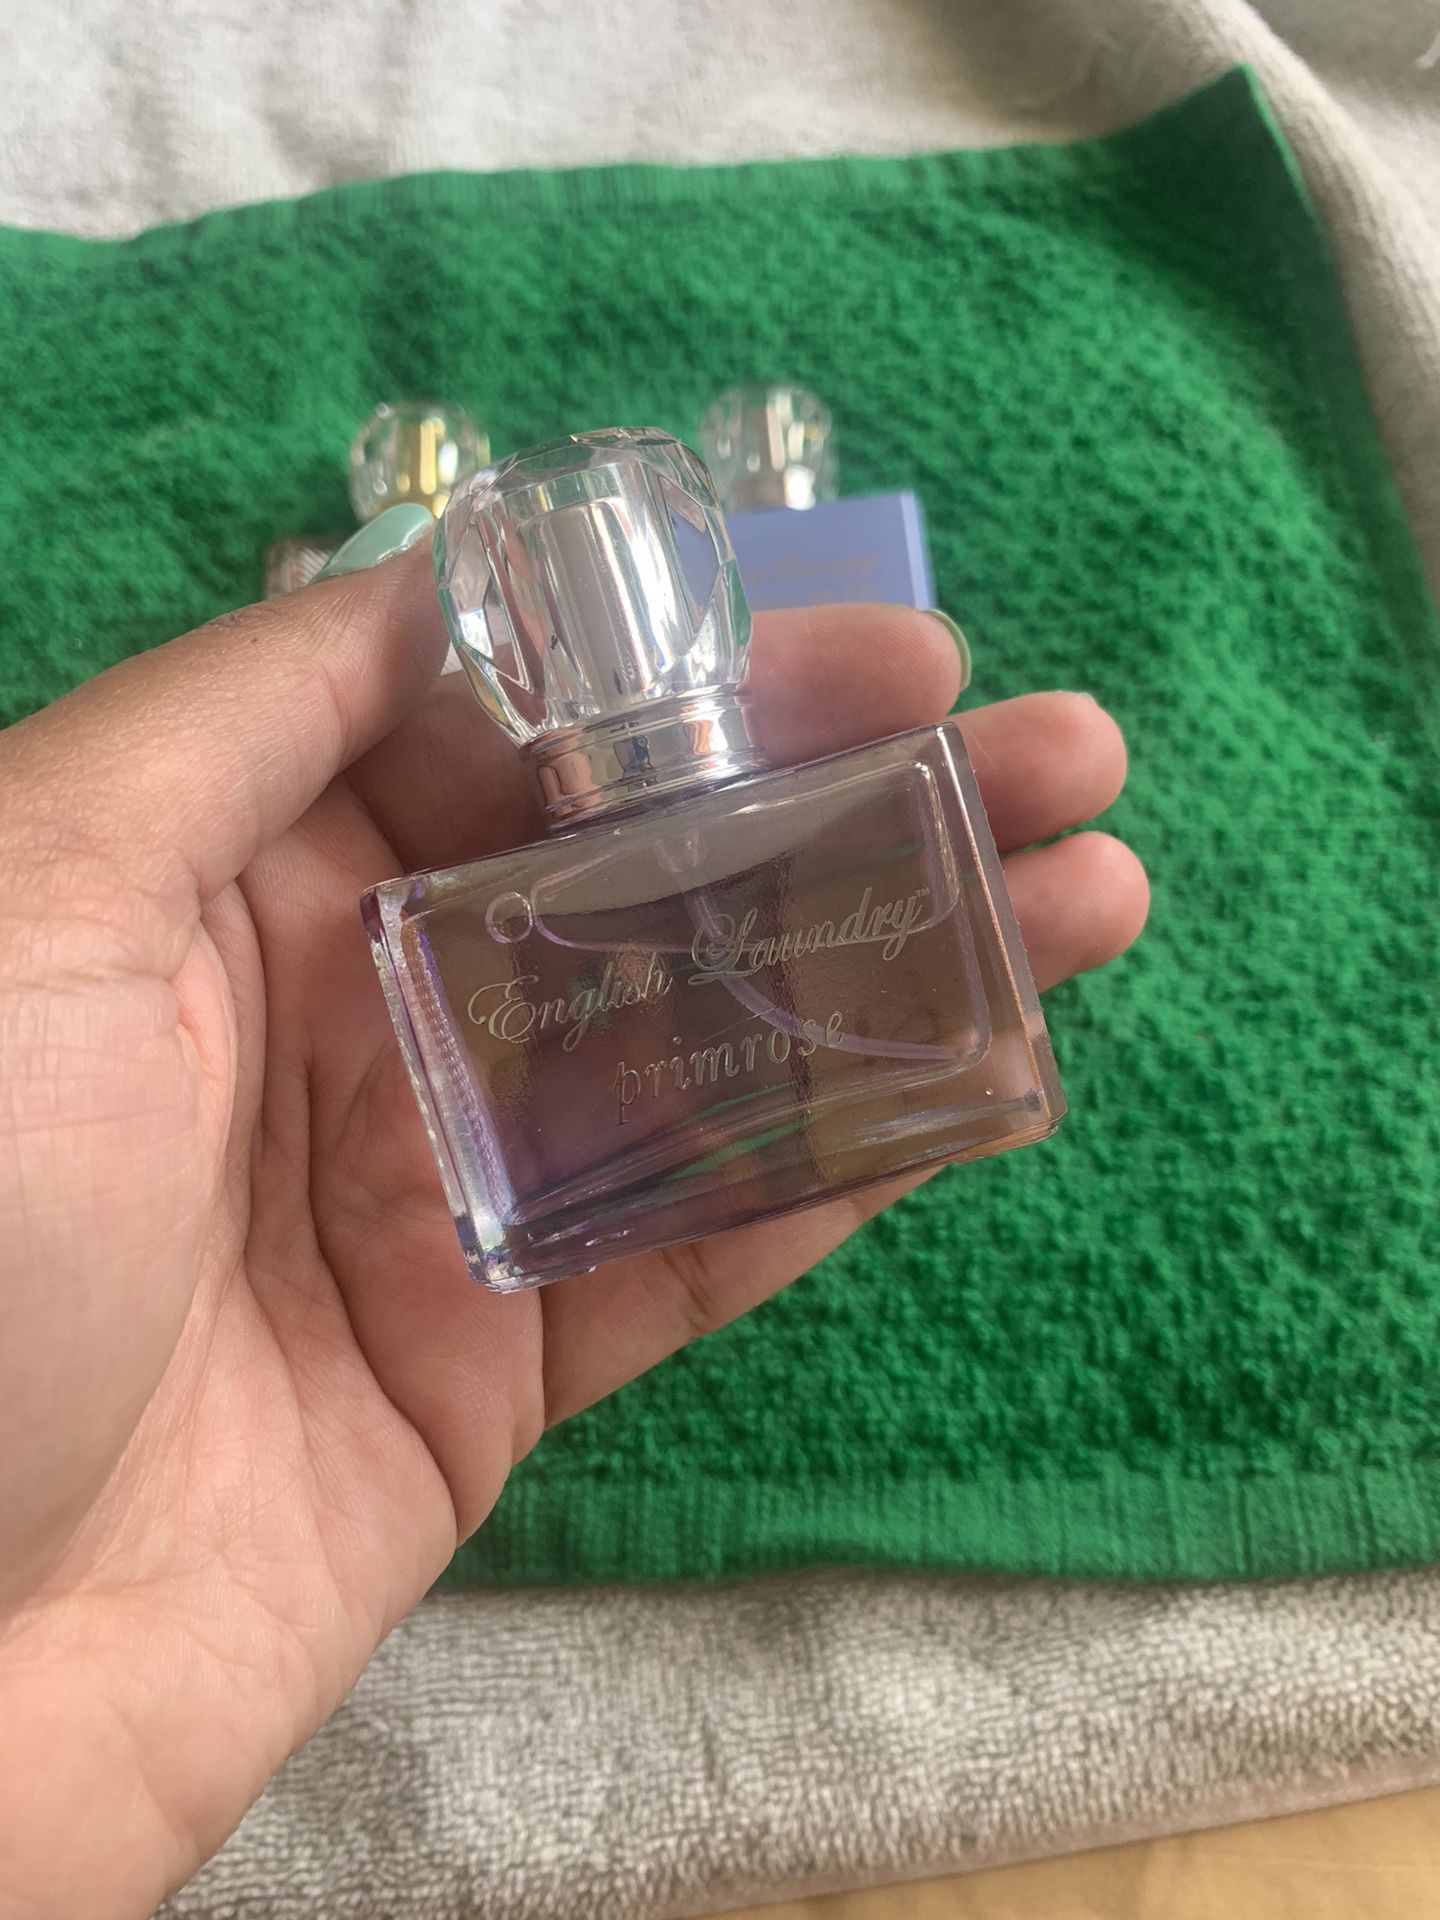 Mercedes Benz Intense 100ml for Sale in Brooklyn, NY - OfferUp